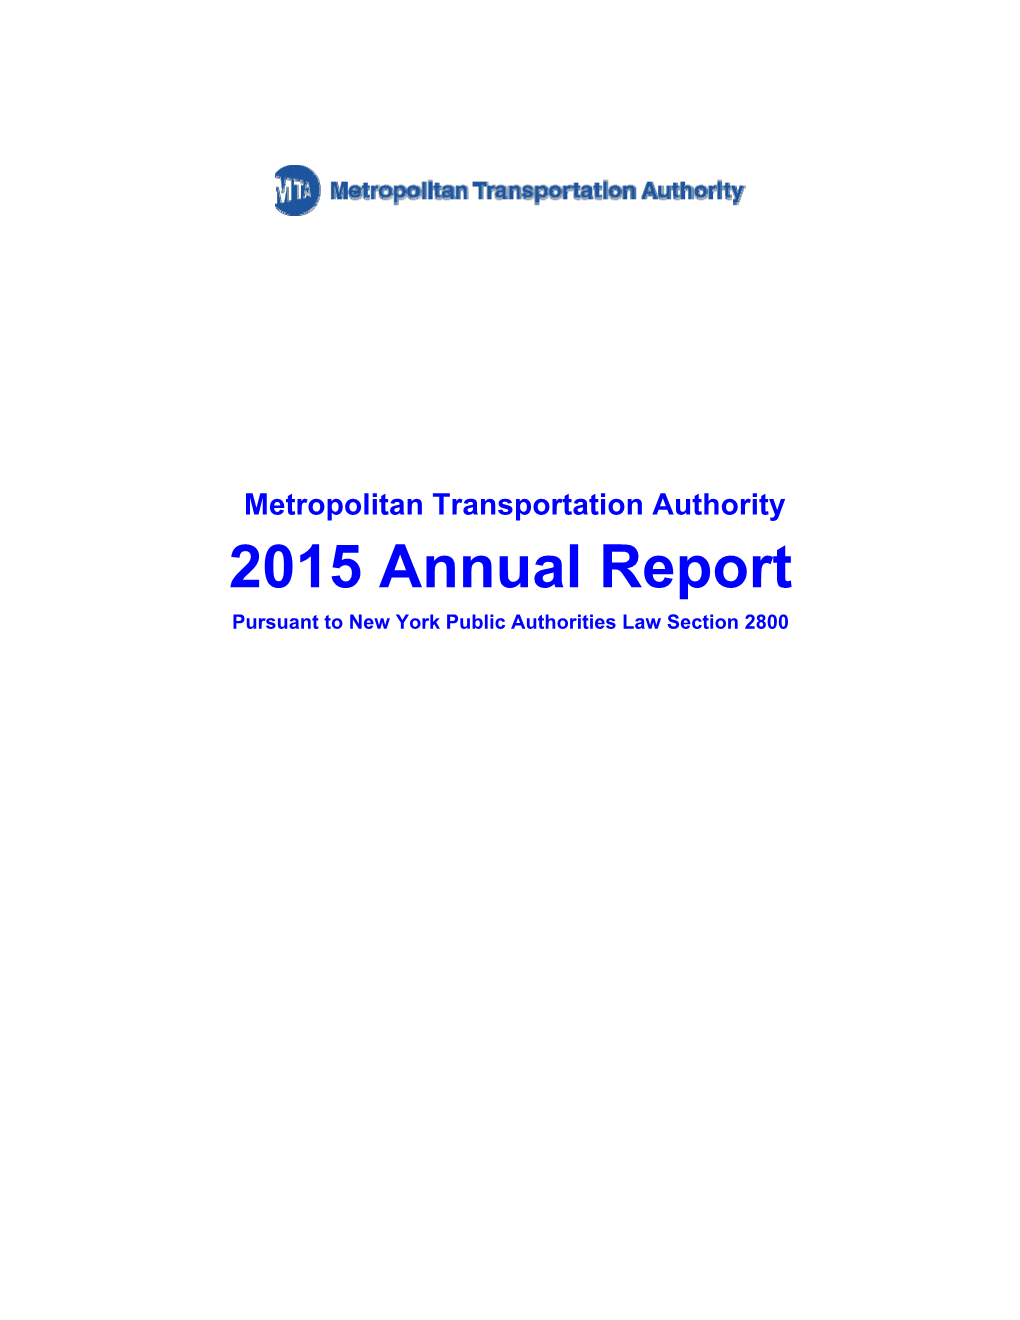 Metropolitan Transportation Authority 2015 Annual Report Pursuant to New York Public Authorities Law Section 2800